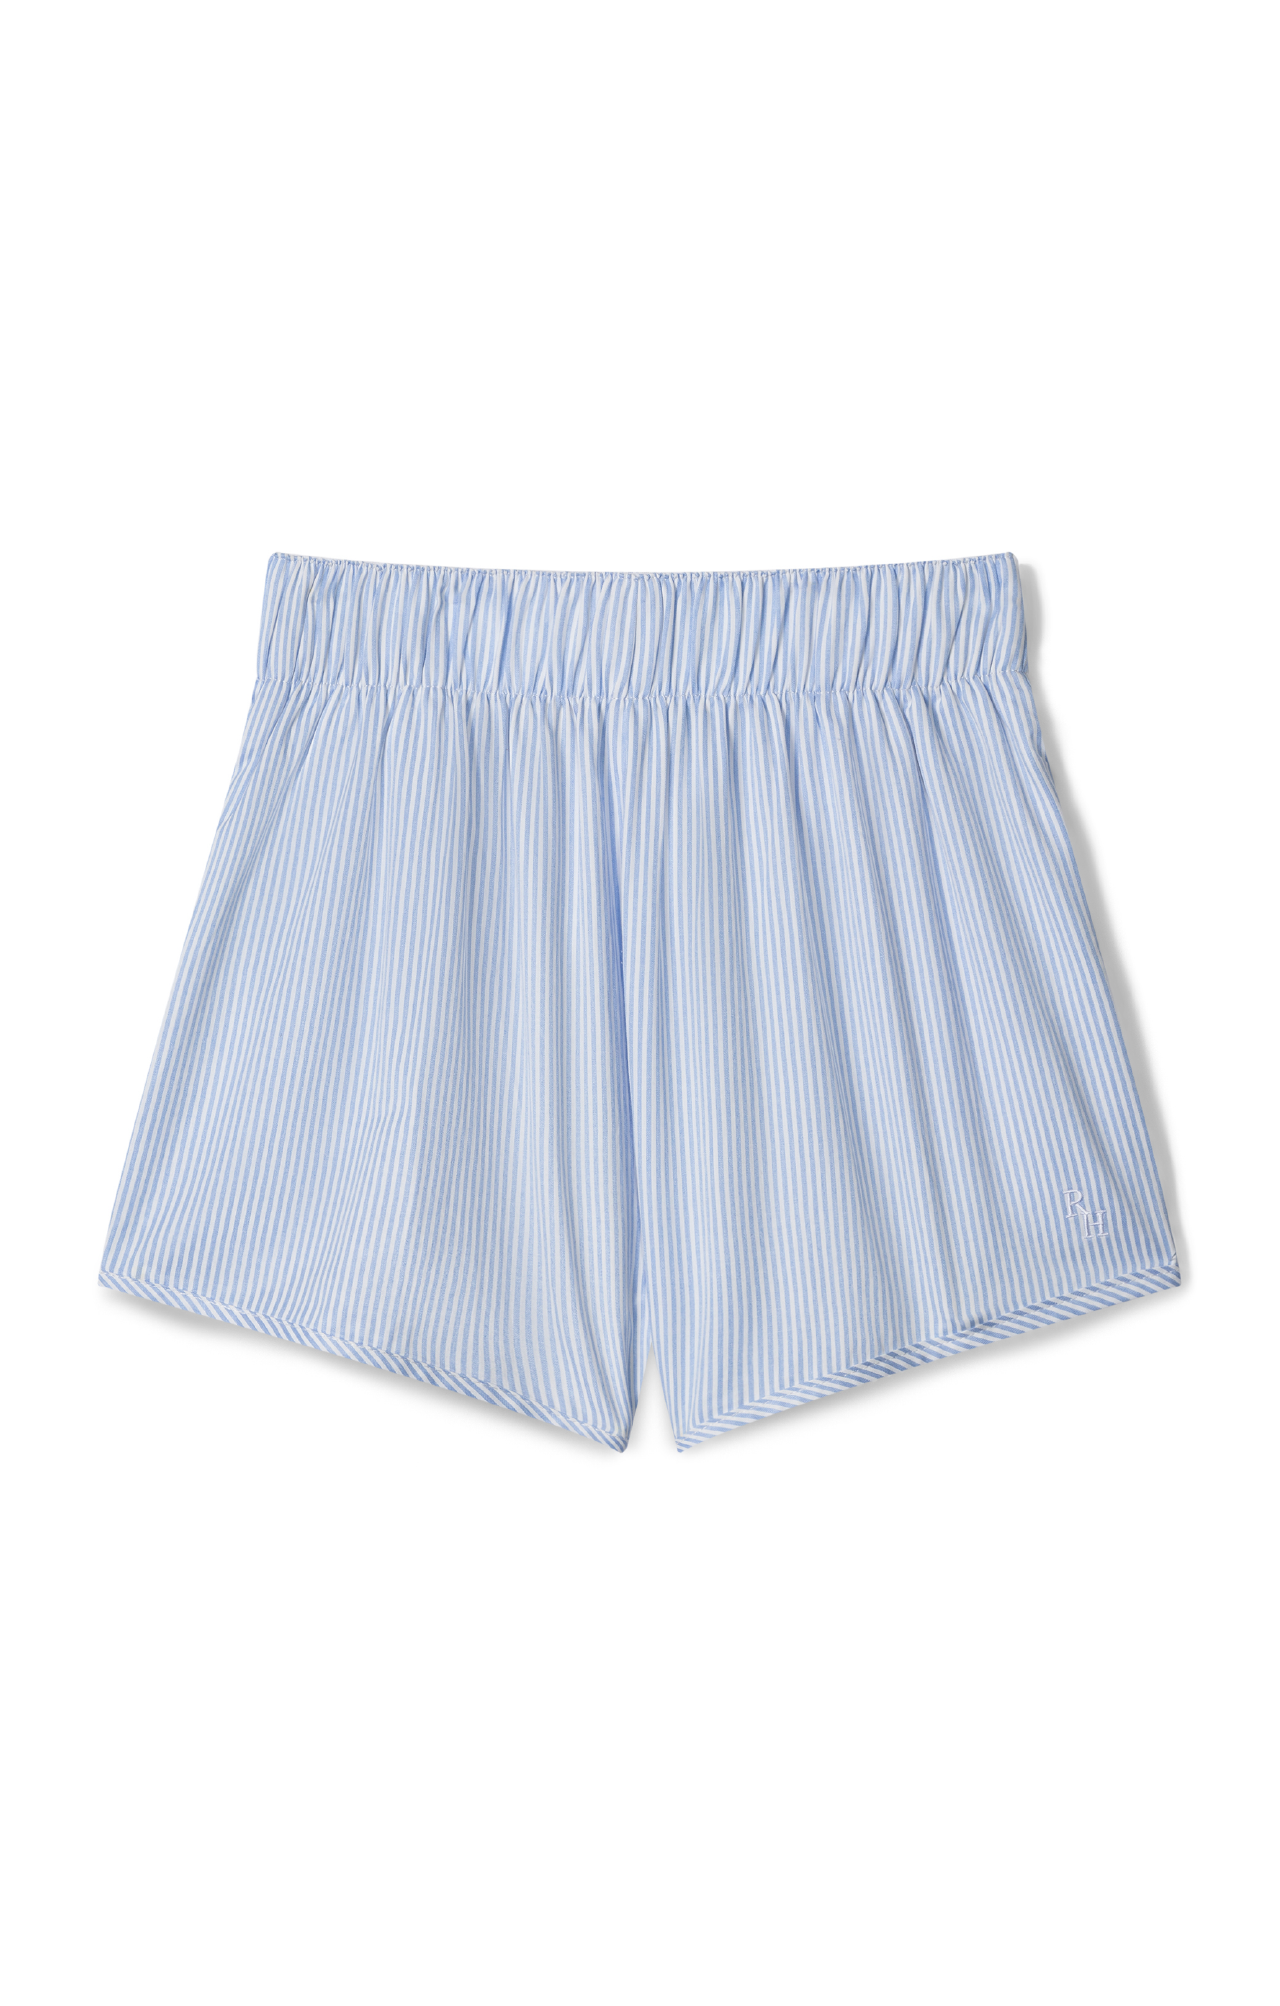 The Ferry Cotton Short in Blue